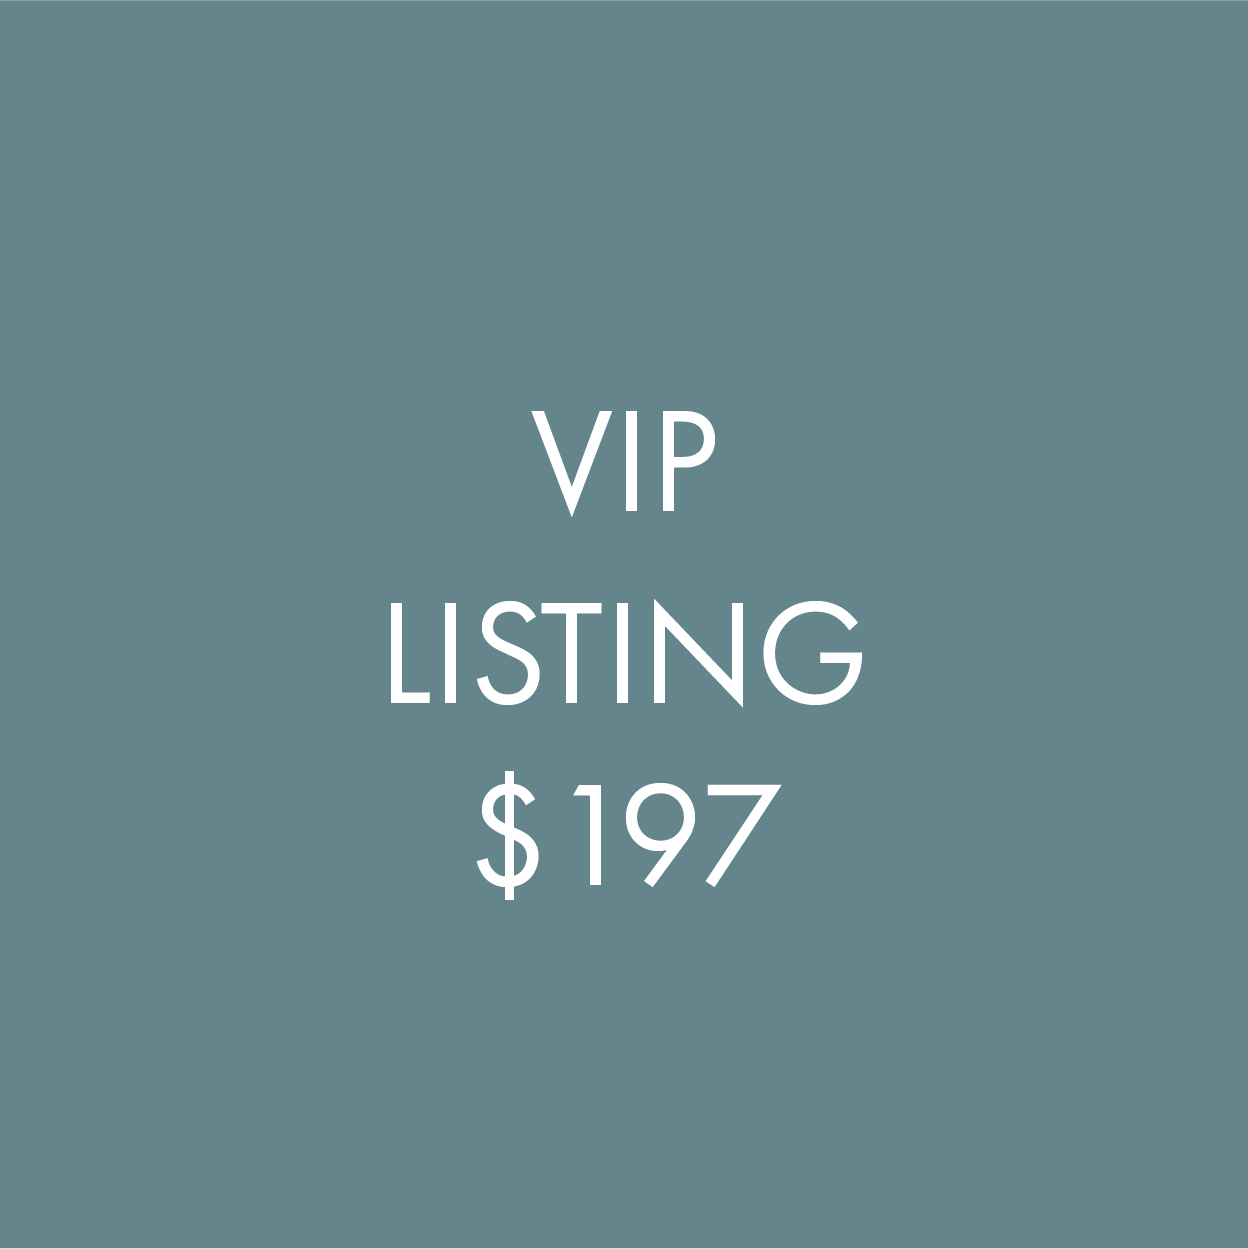 VIP LISTING - The Power of SHE